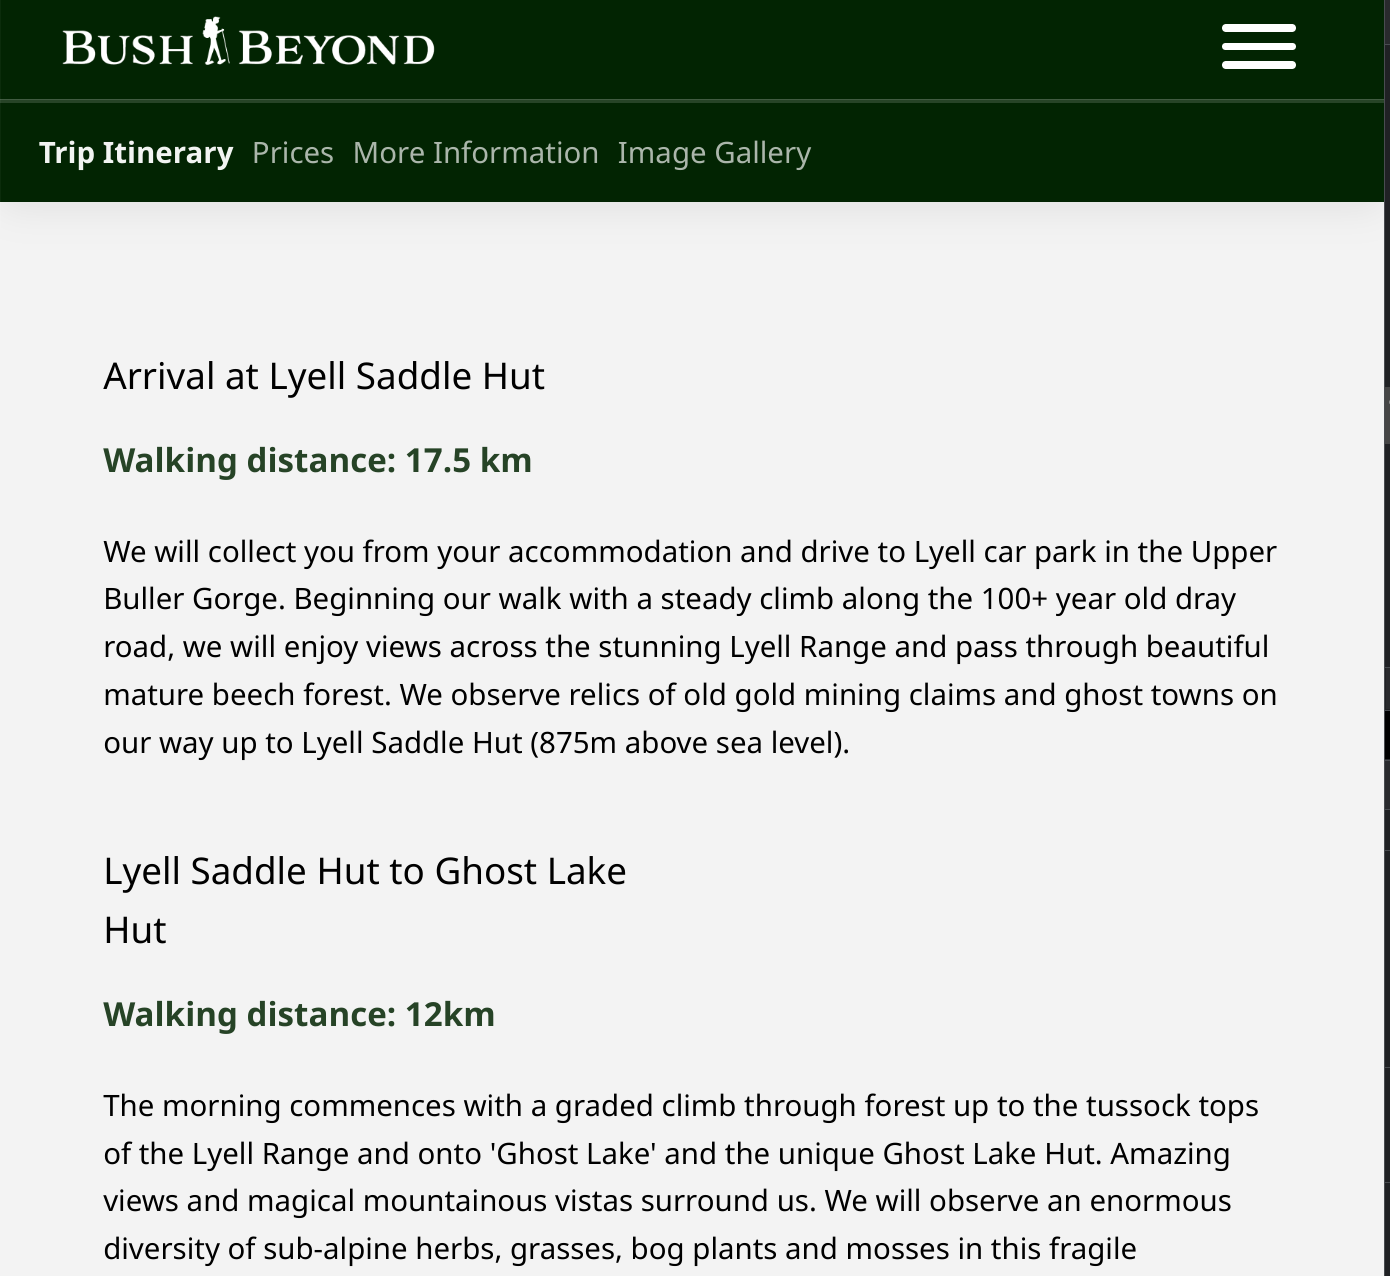 A small navigation menu helps people answer their most important questions about the guided tour.